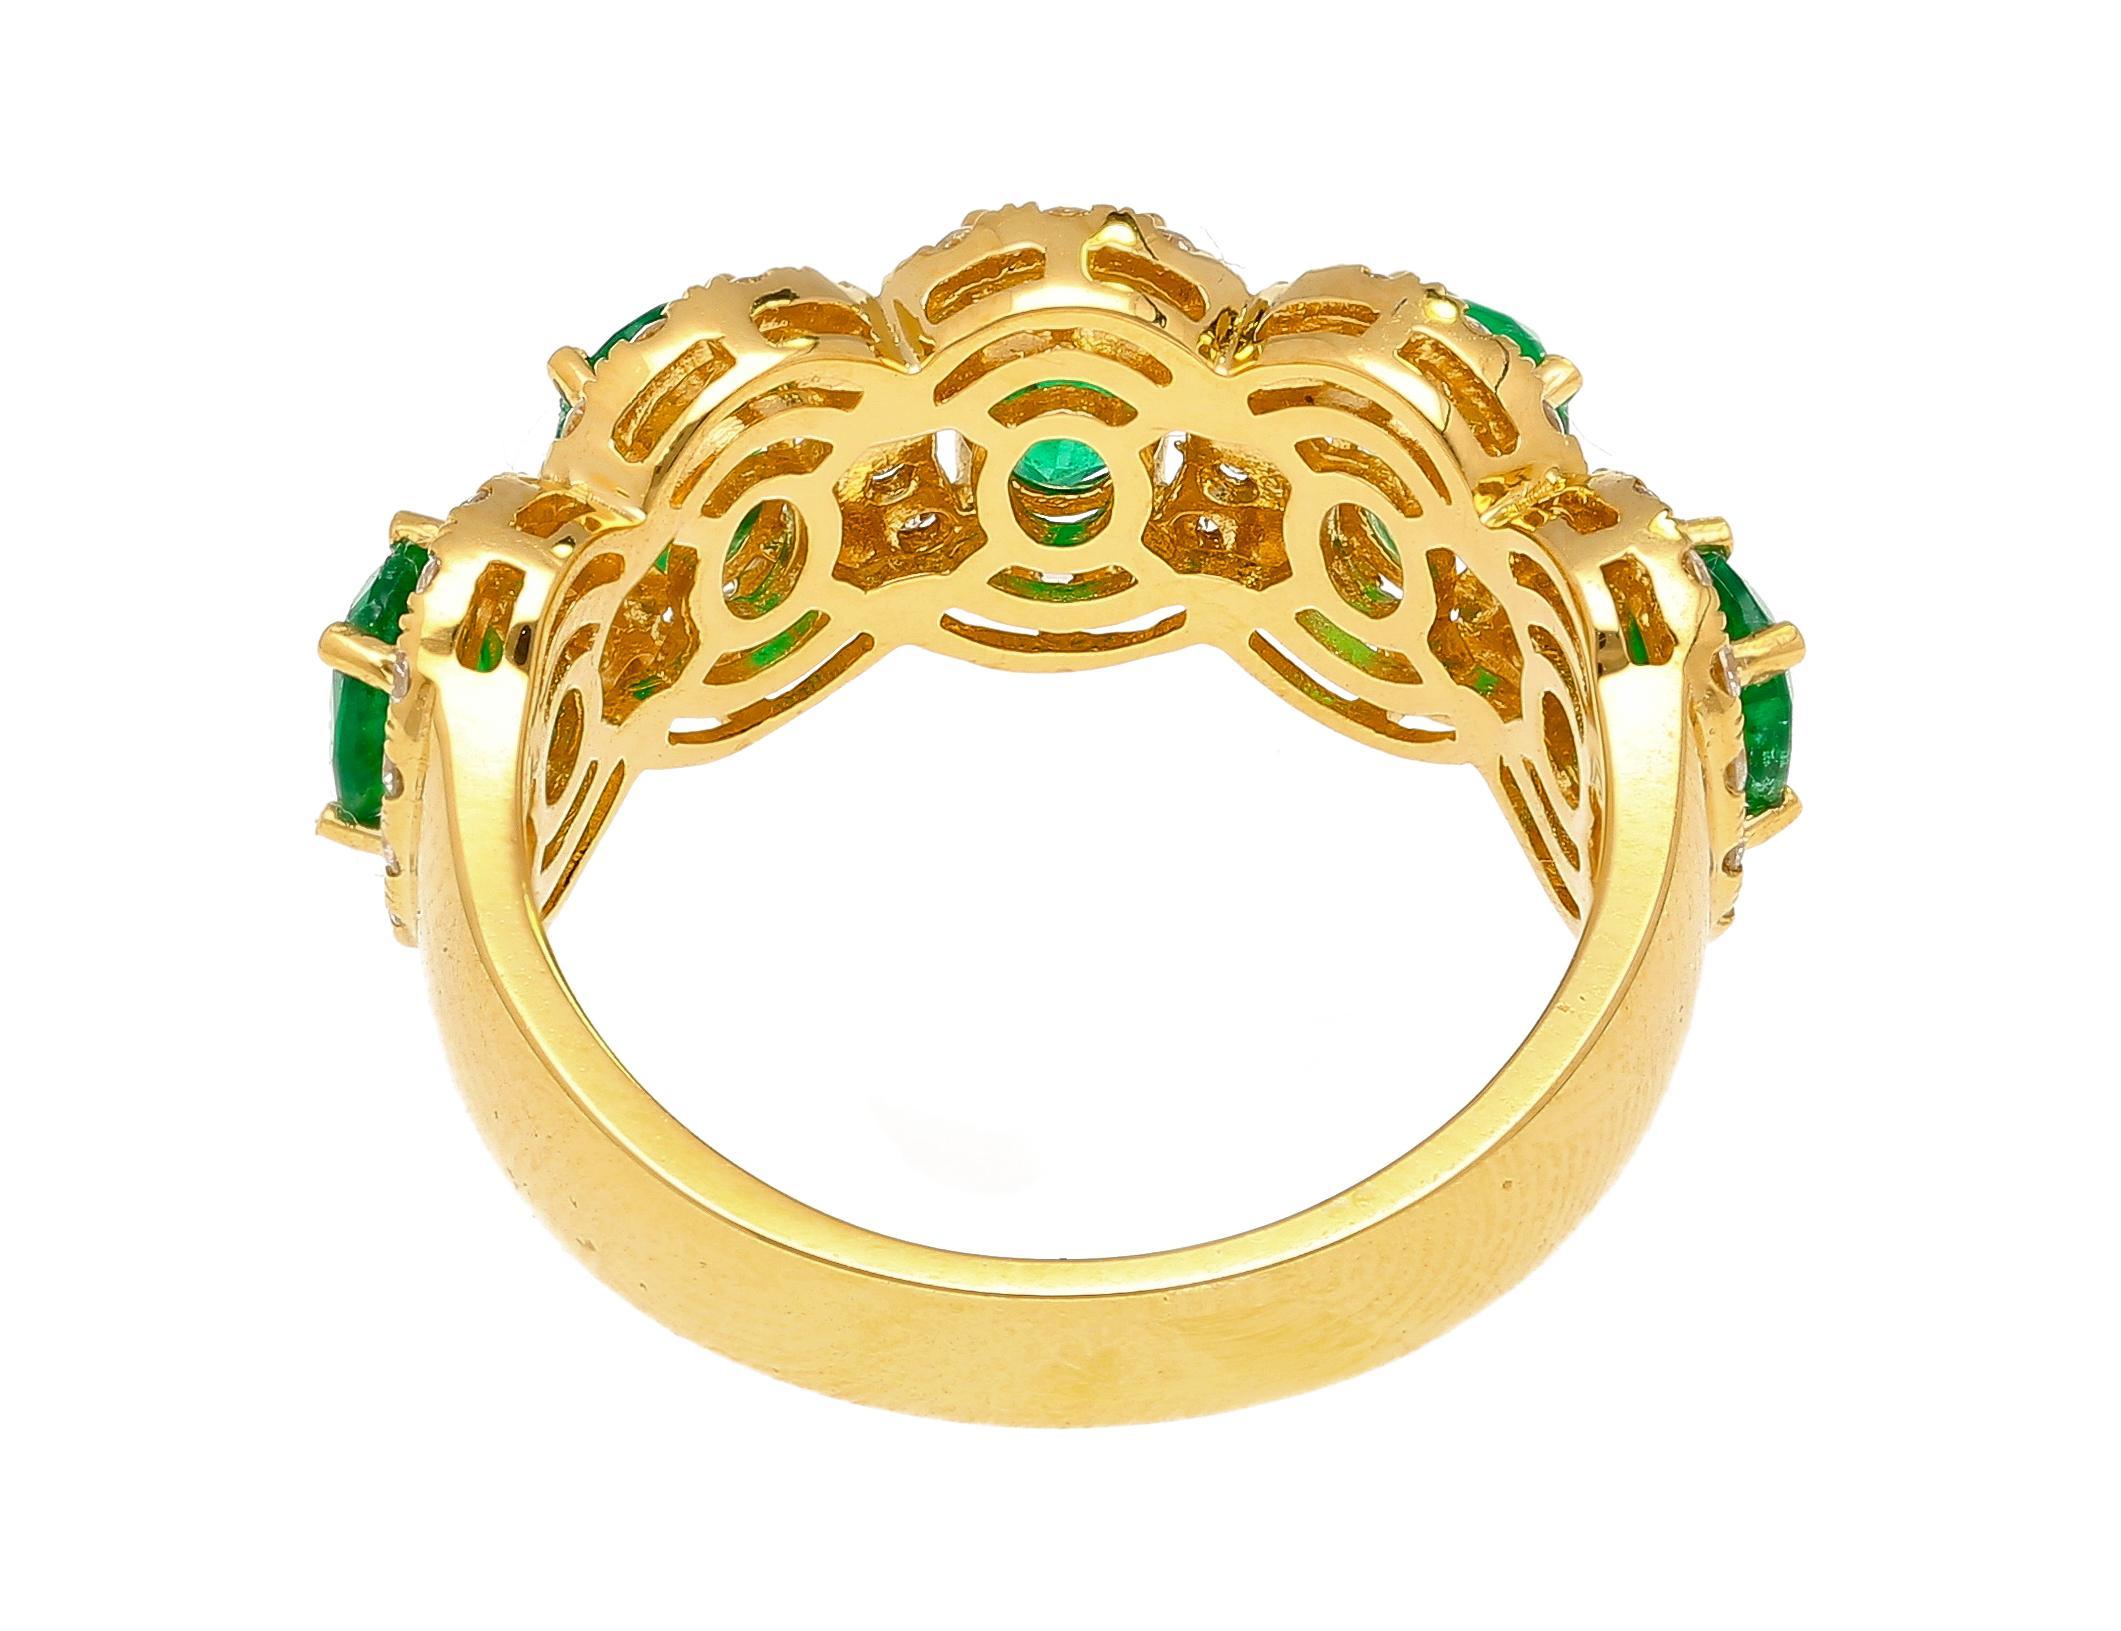 Contemporary 2.11 Carat Oval Cut Emerald and Diamond Wedding Band in 18K Gold For Sale